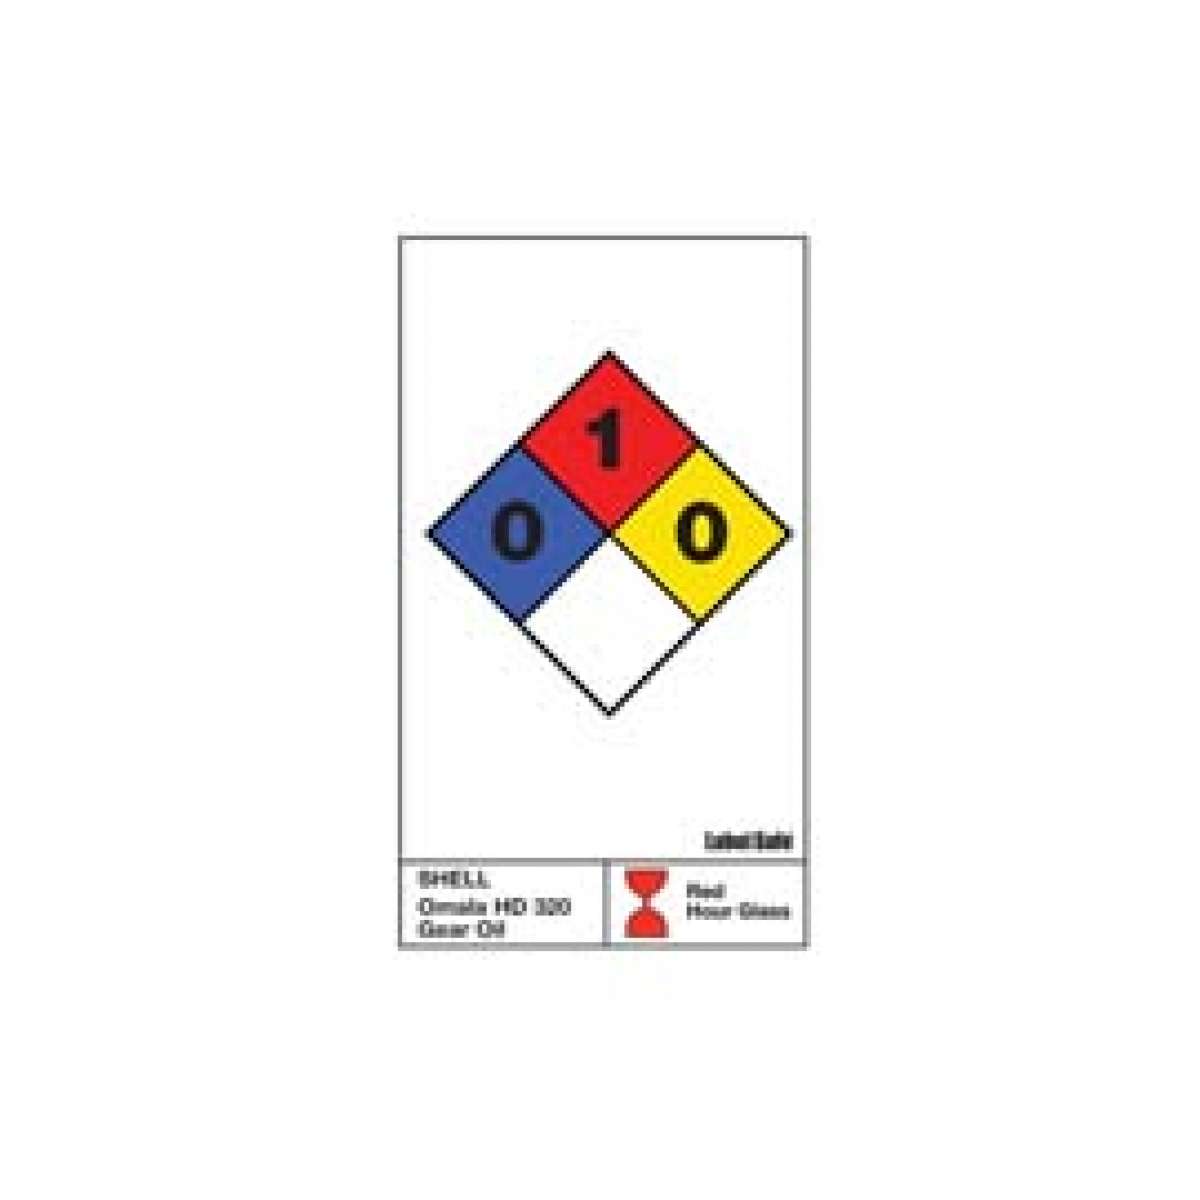 NFPA Label - 2" x 3.25" - Water Resistant Paper  (1 sheet of 10 labels)